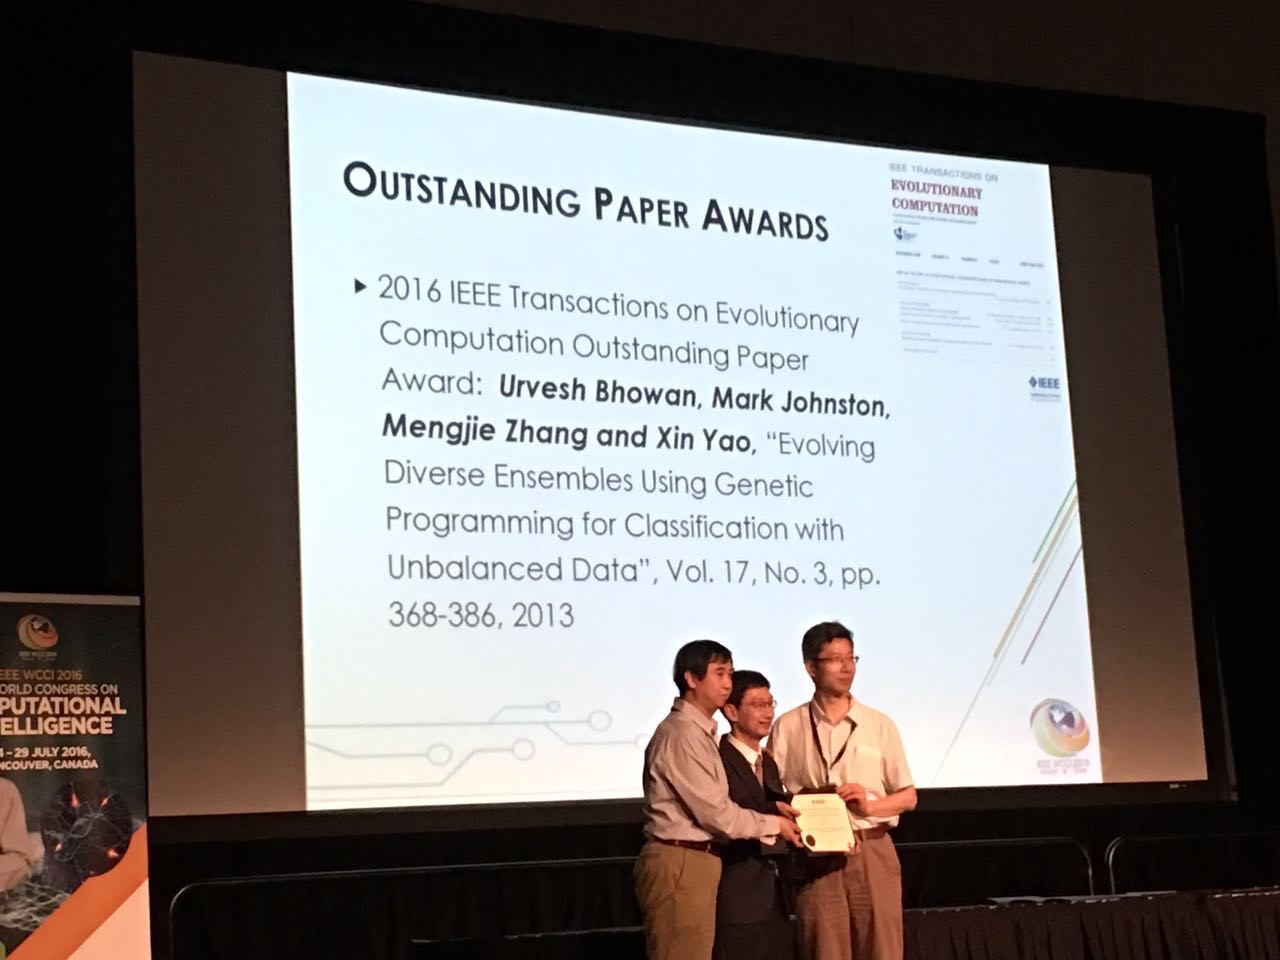 Outstanding paper awards